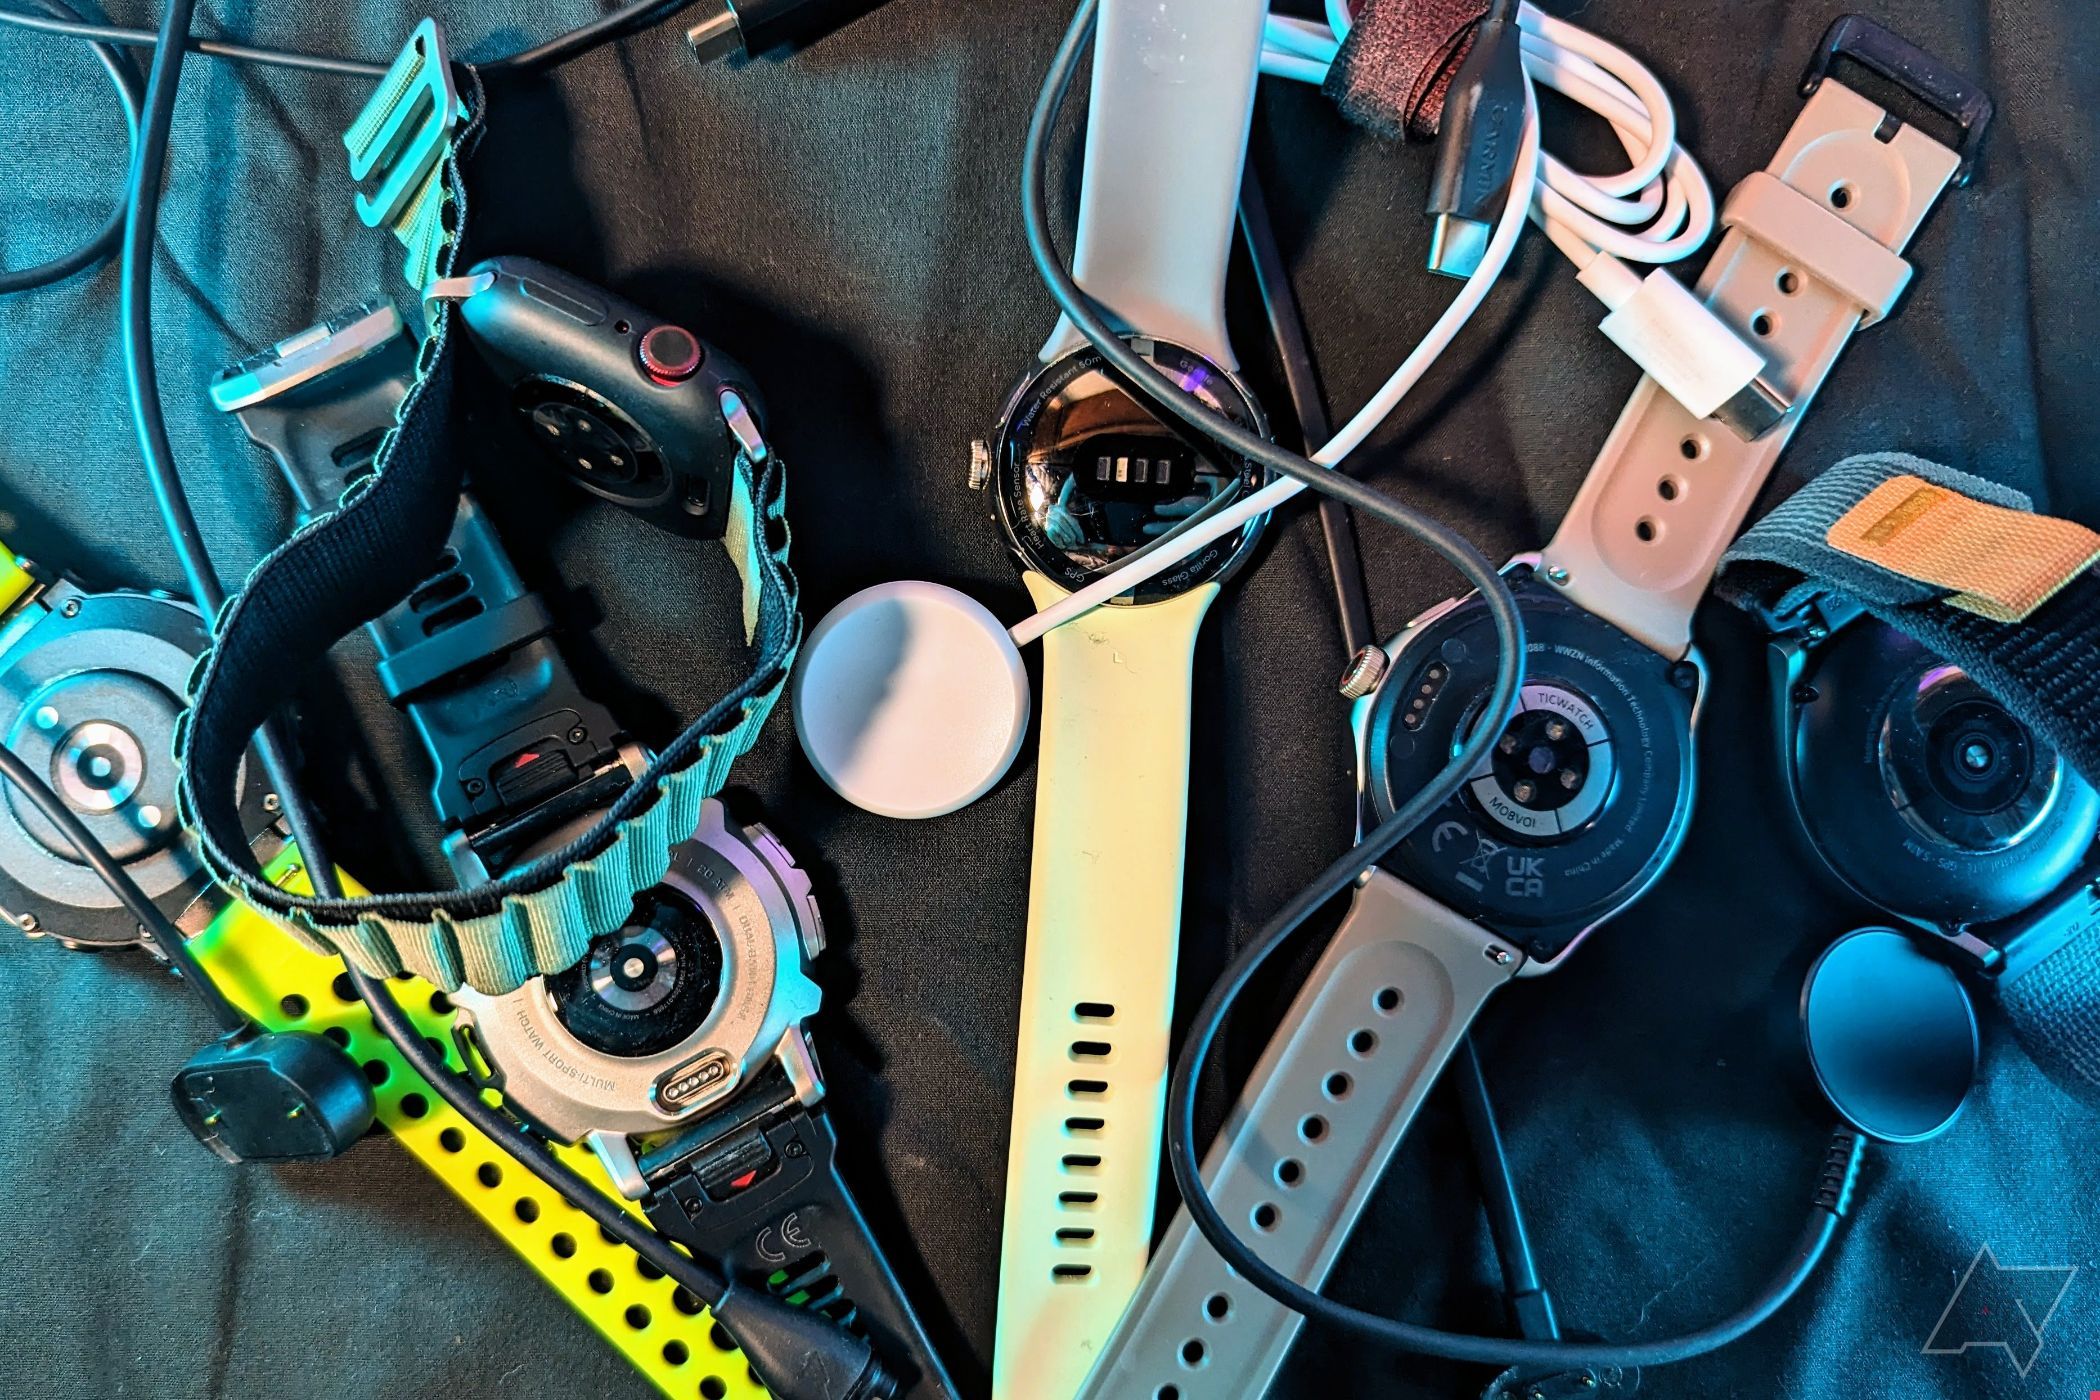 Apple Watch Series 7, Google Pixel Watch, Galaxy Watch 5 Pro, and TicWatch Pro 5 together with charging cables